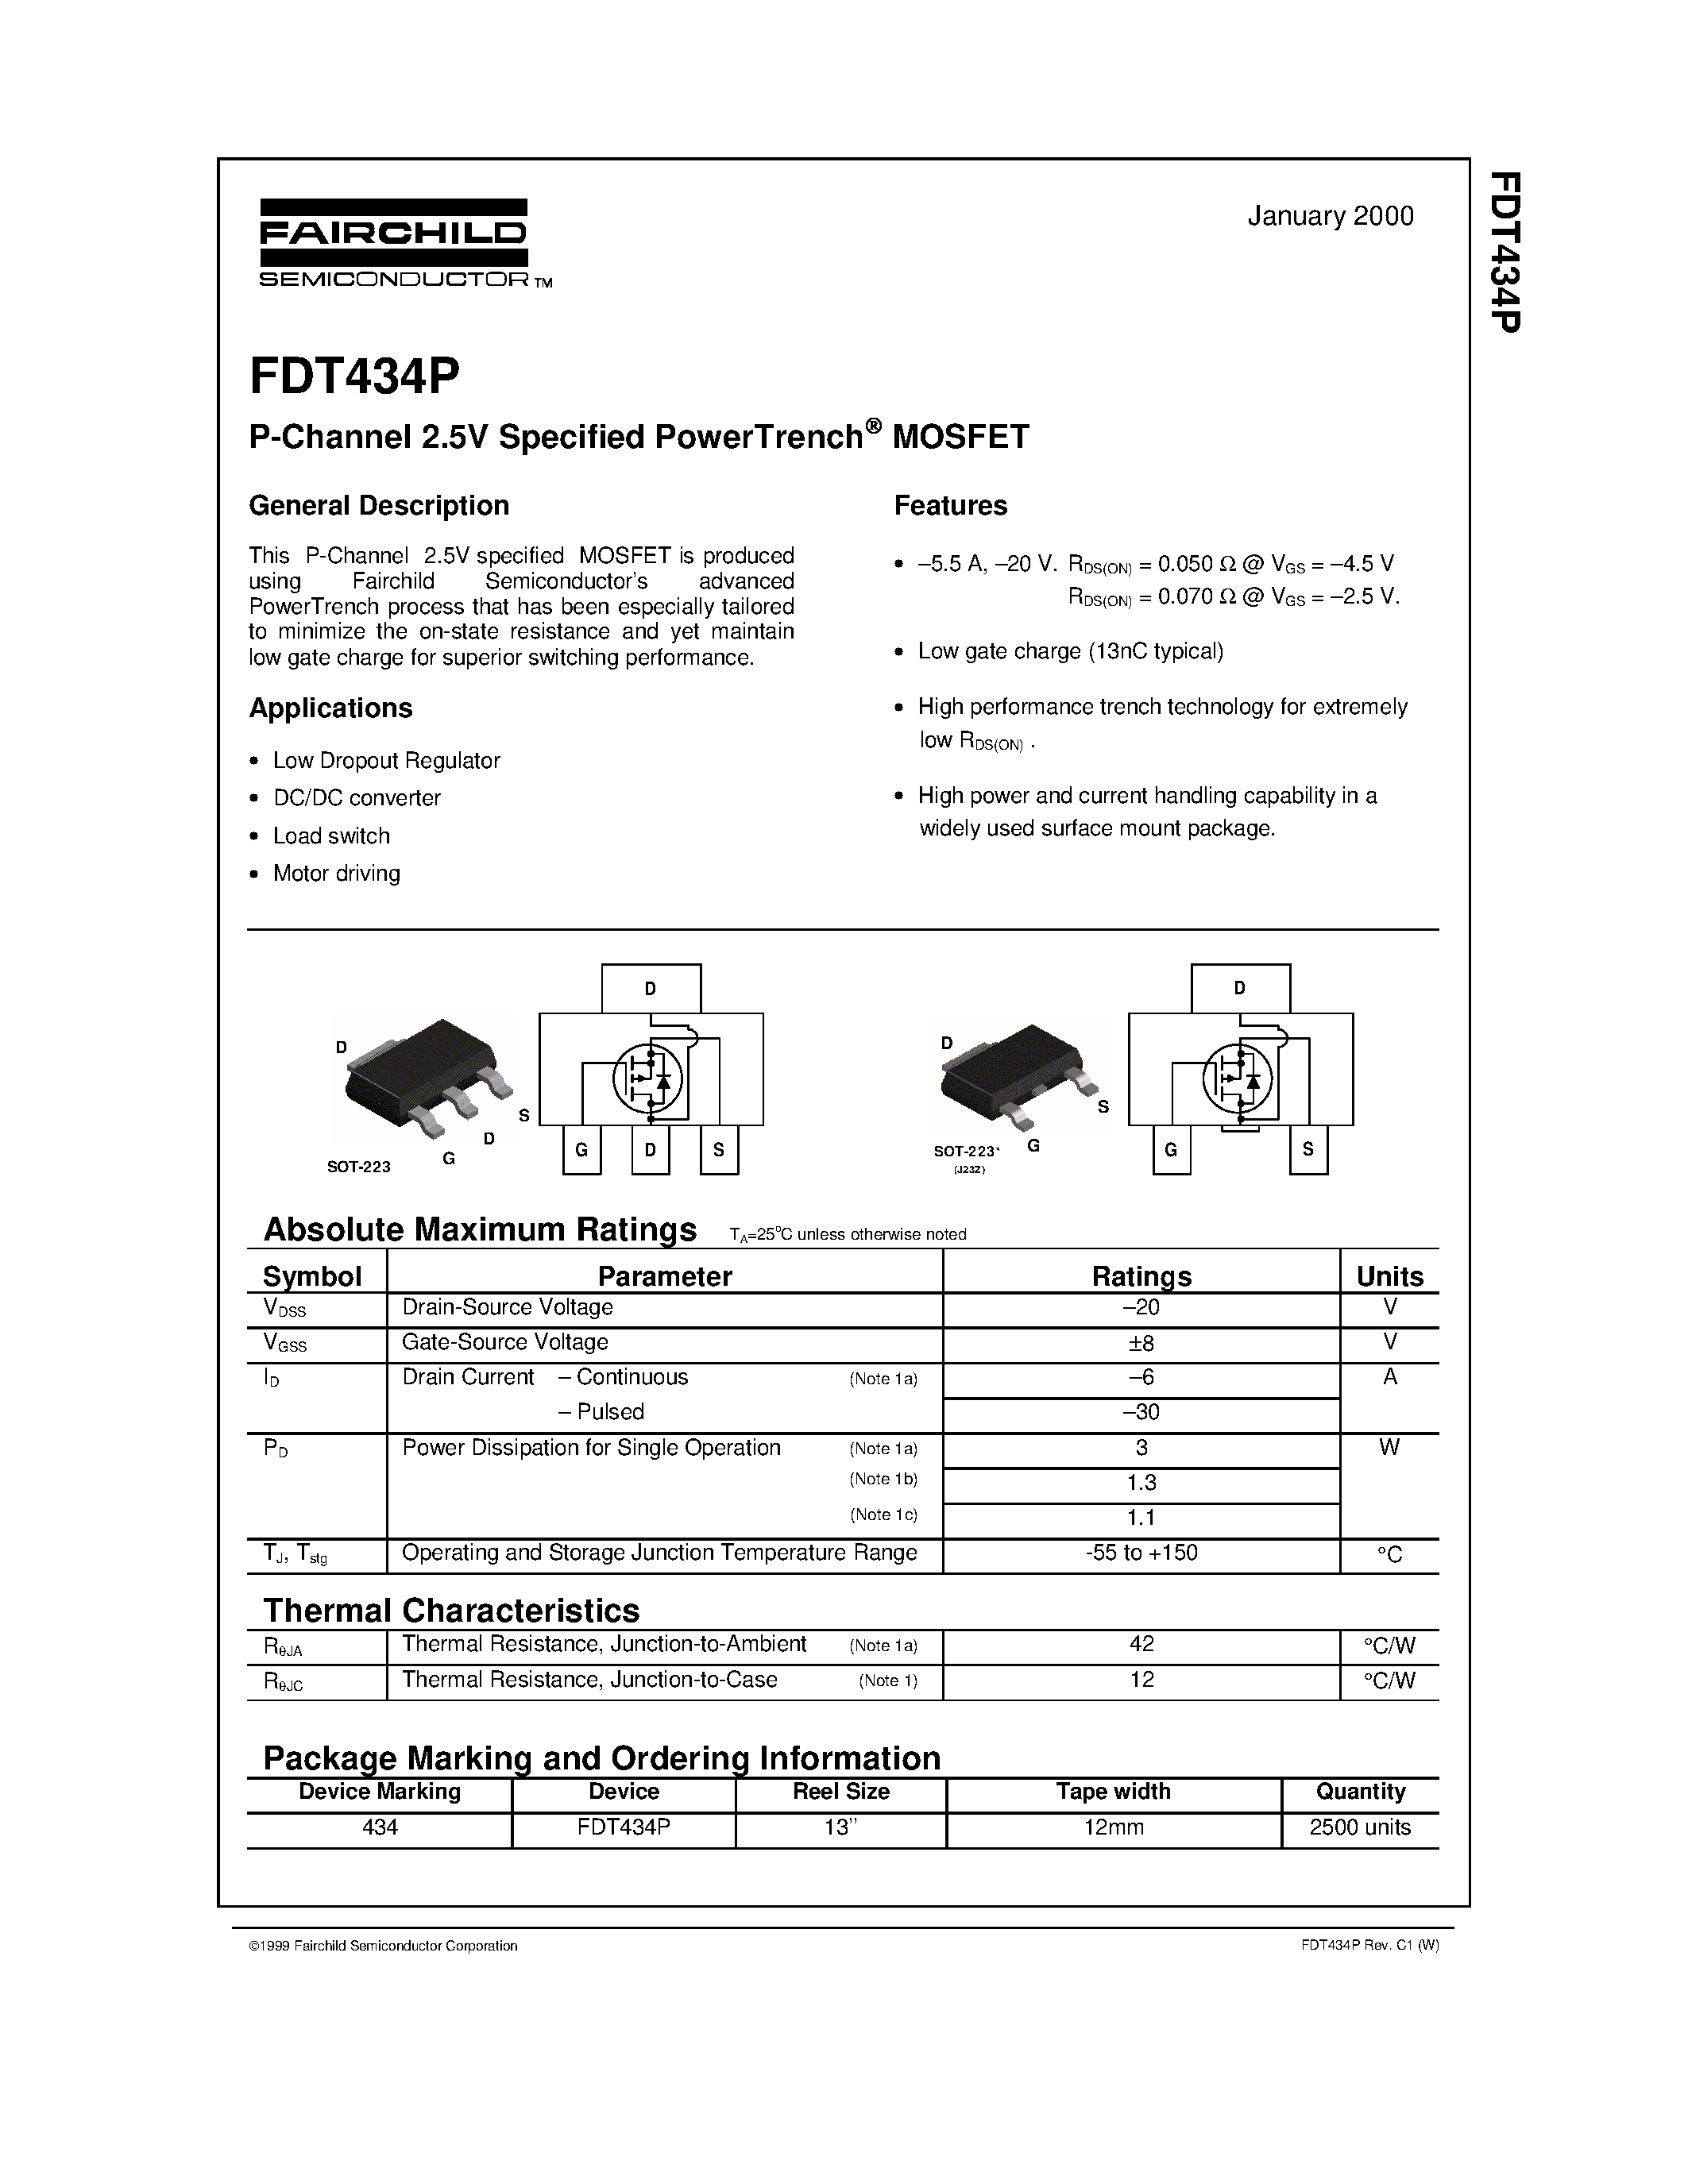 Даташит FDT434P - P-Channel 2.5V Specified PowerTrench MOSFET страница 1